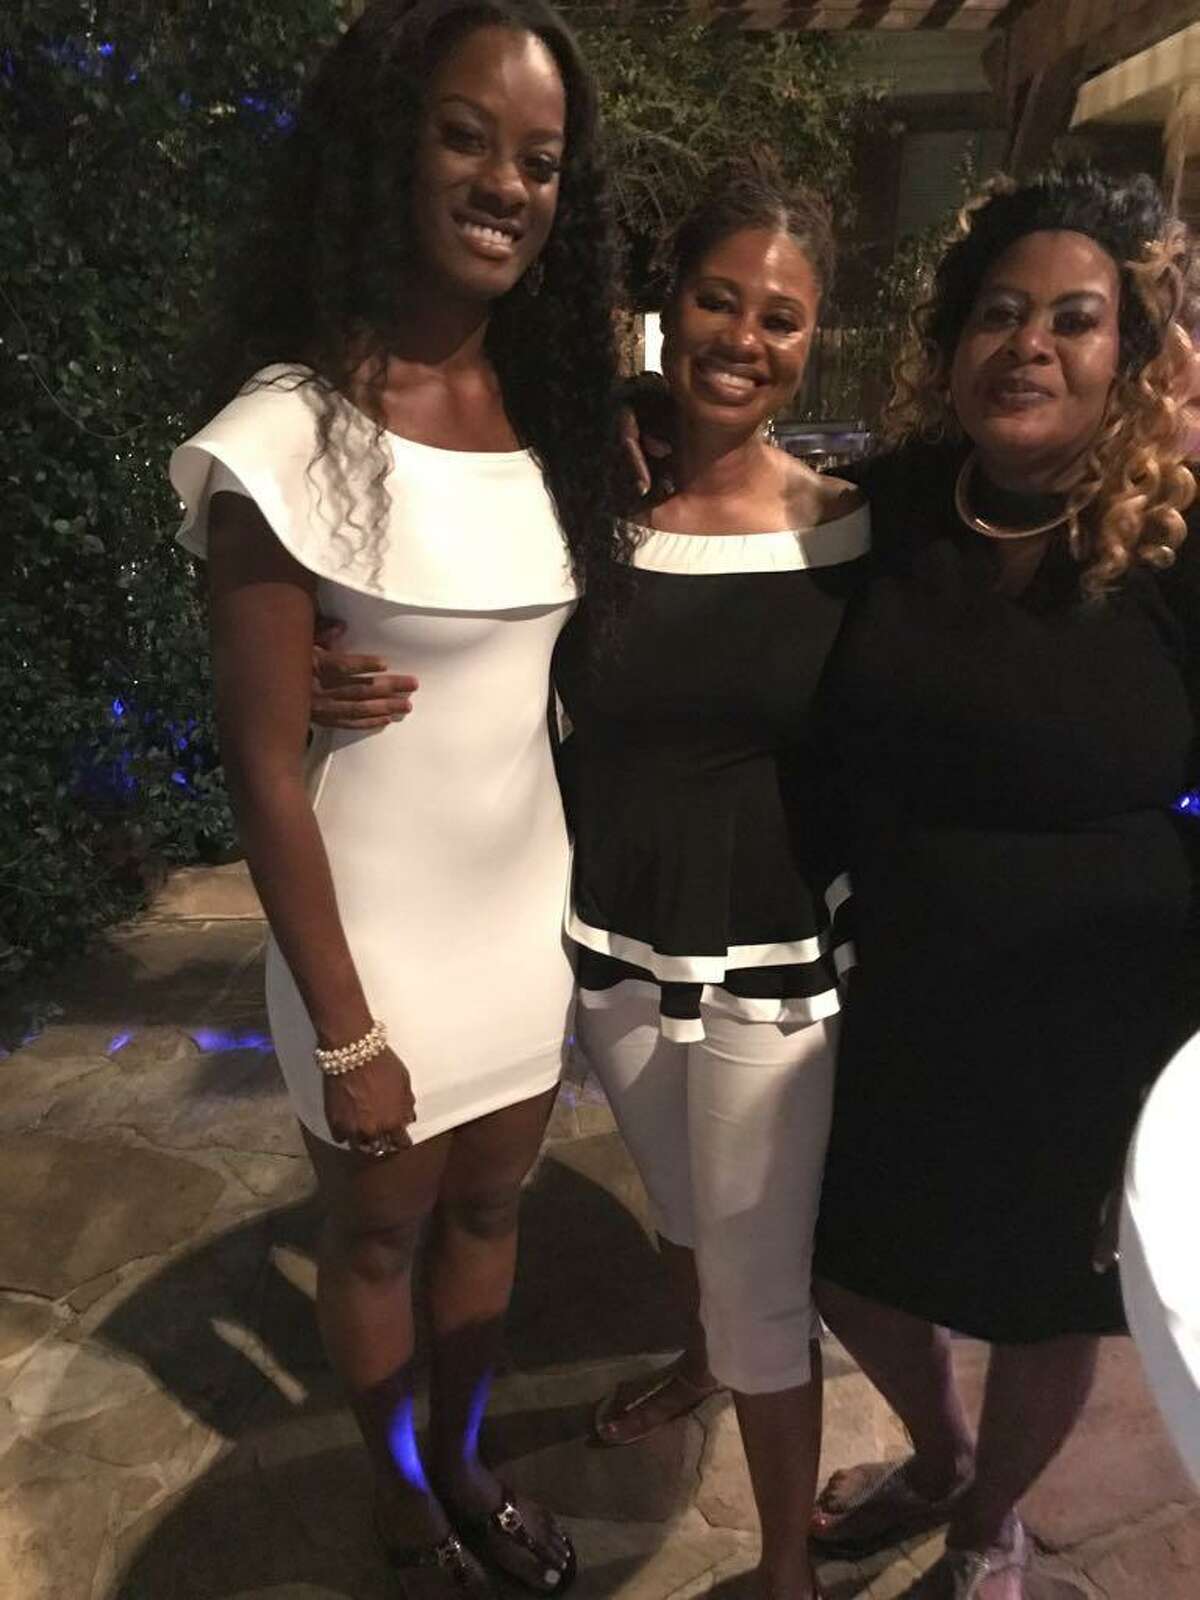 Andreen Mcdonald, left to right, poses with her sister,  Cindy Ann Johnson, and their mother,  Hyacinth Smith, celebrating Andreen's birthday in 2017. McDonald went missing Friday, March 1, 2019, and is feared dead. A search for her body Sunday and Monday didn't yield results; the search continues Tuesday, March 5.